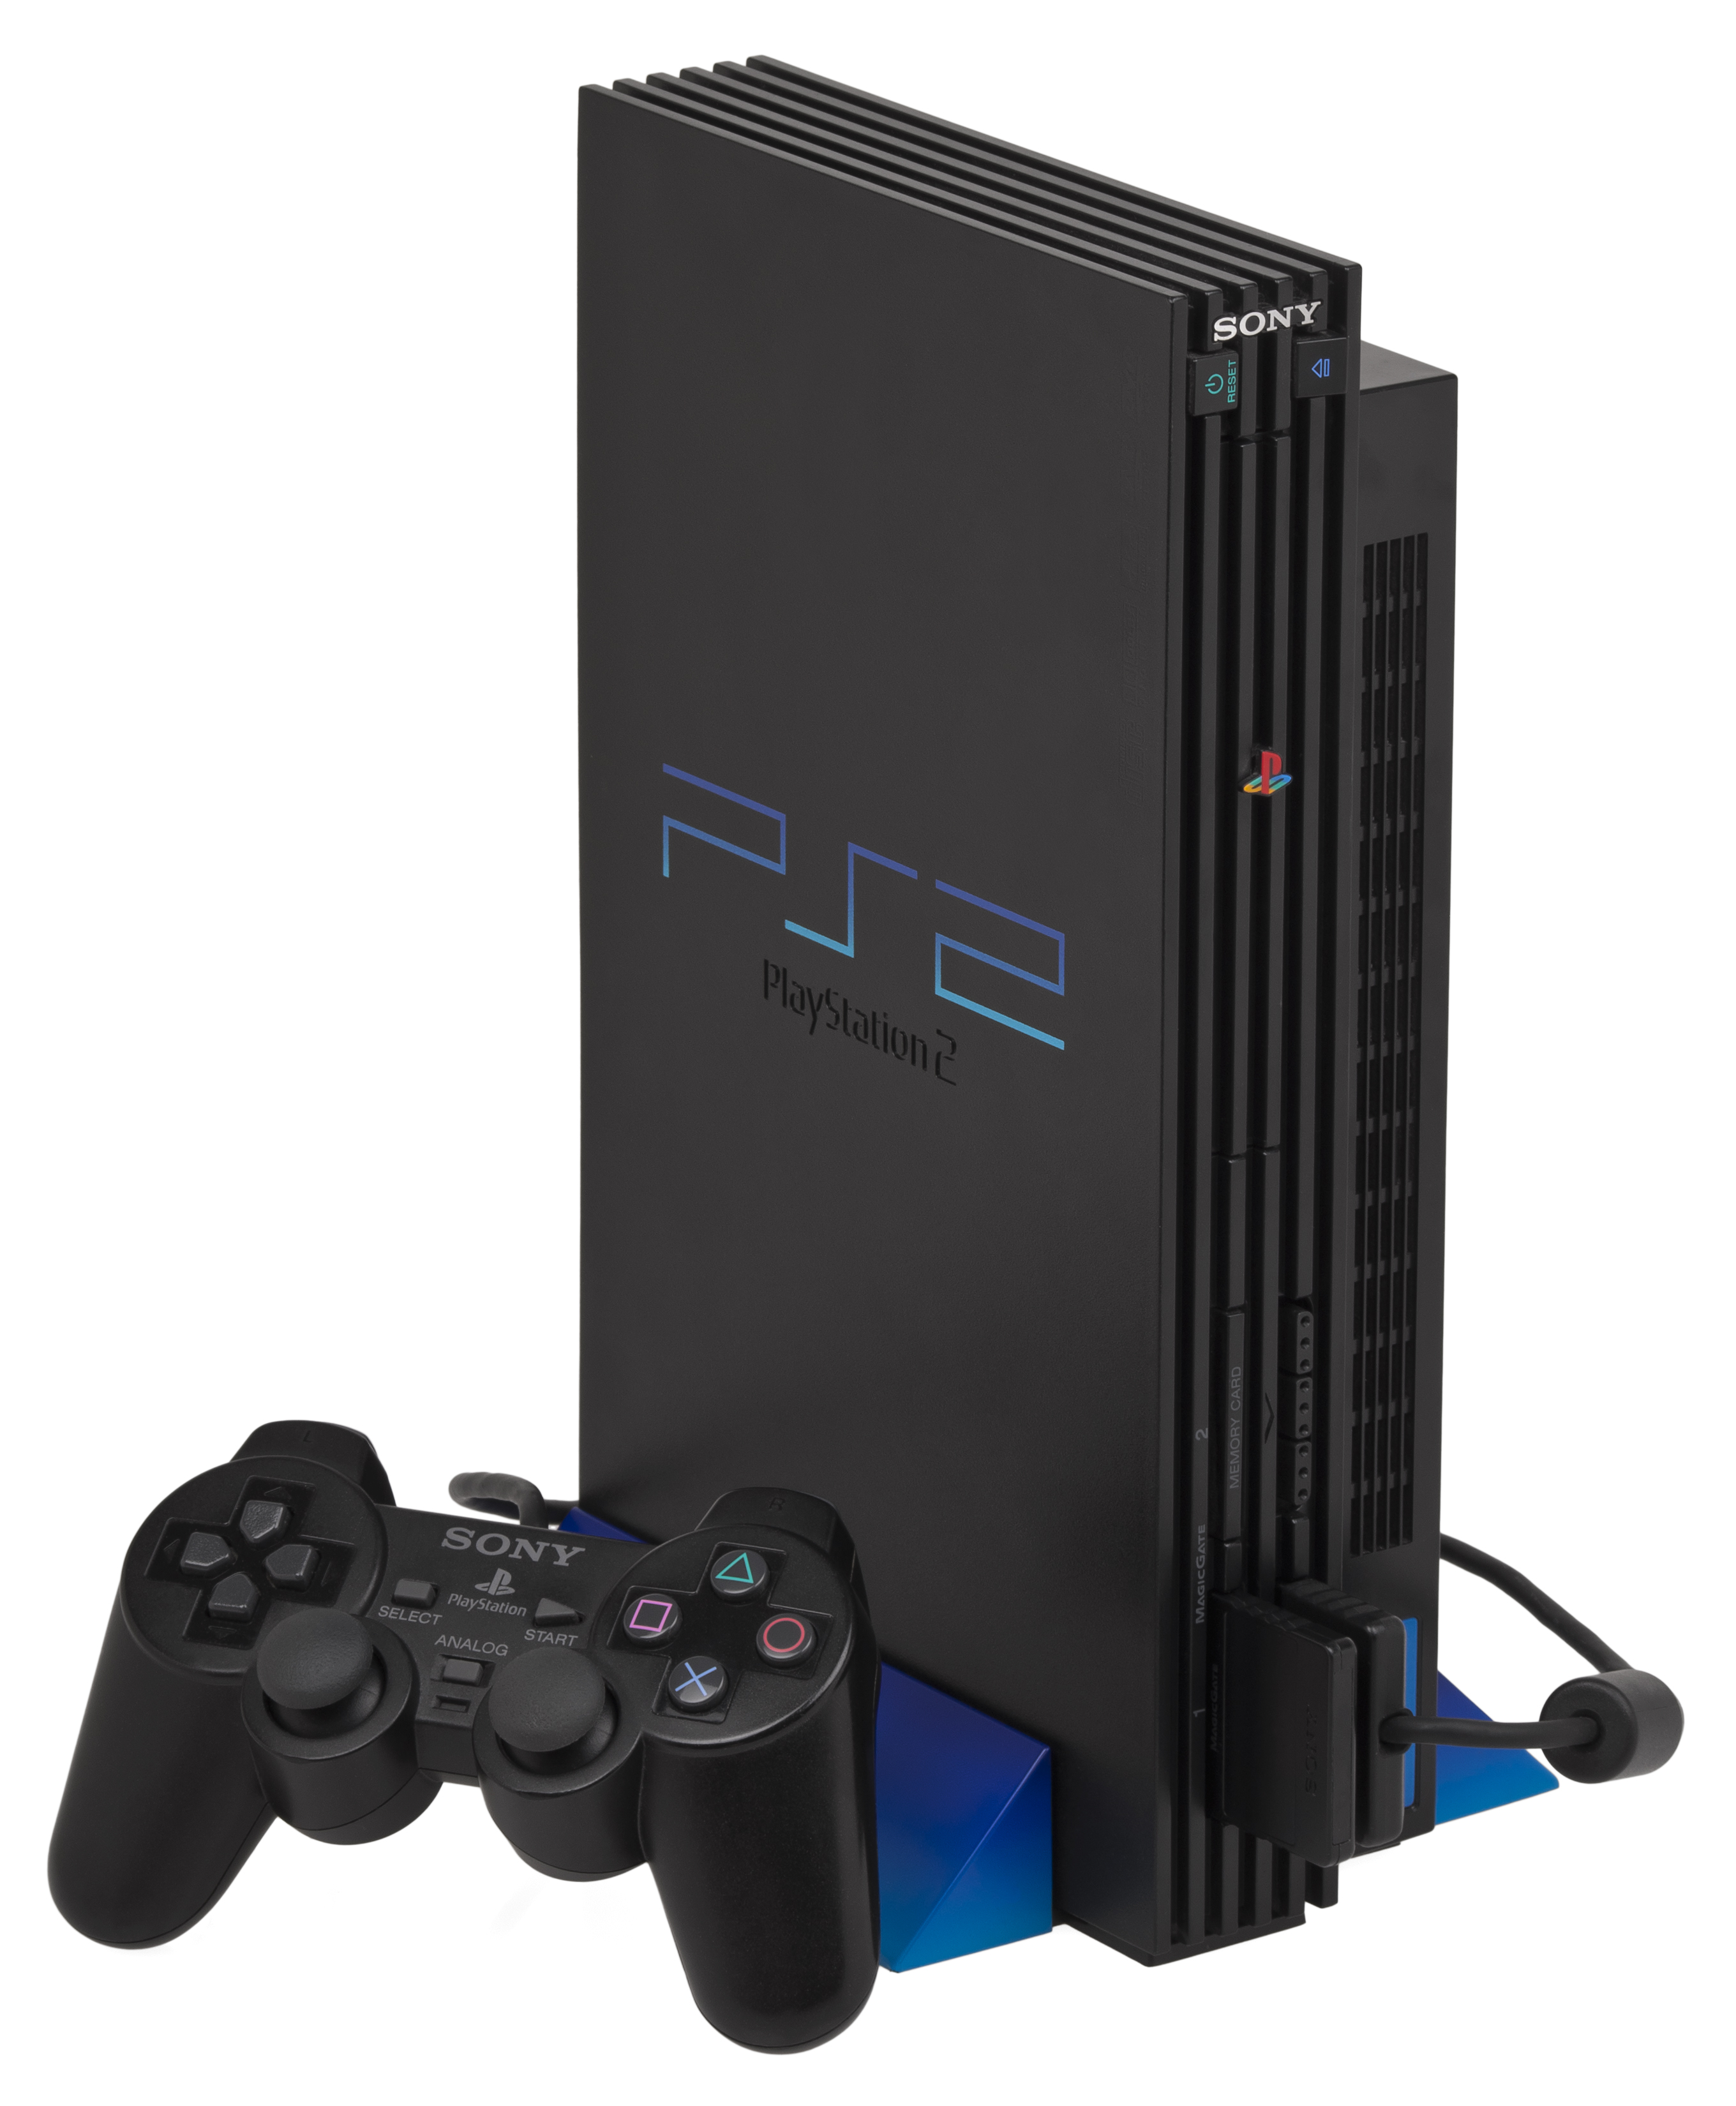 Playstation 2 wallpaper, Video Game, HQ Playstation 2 picture